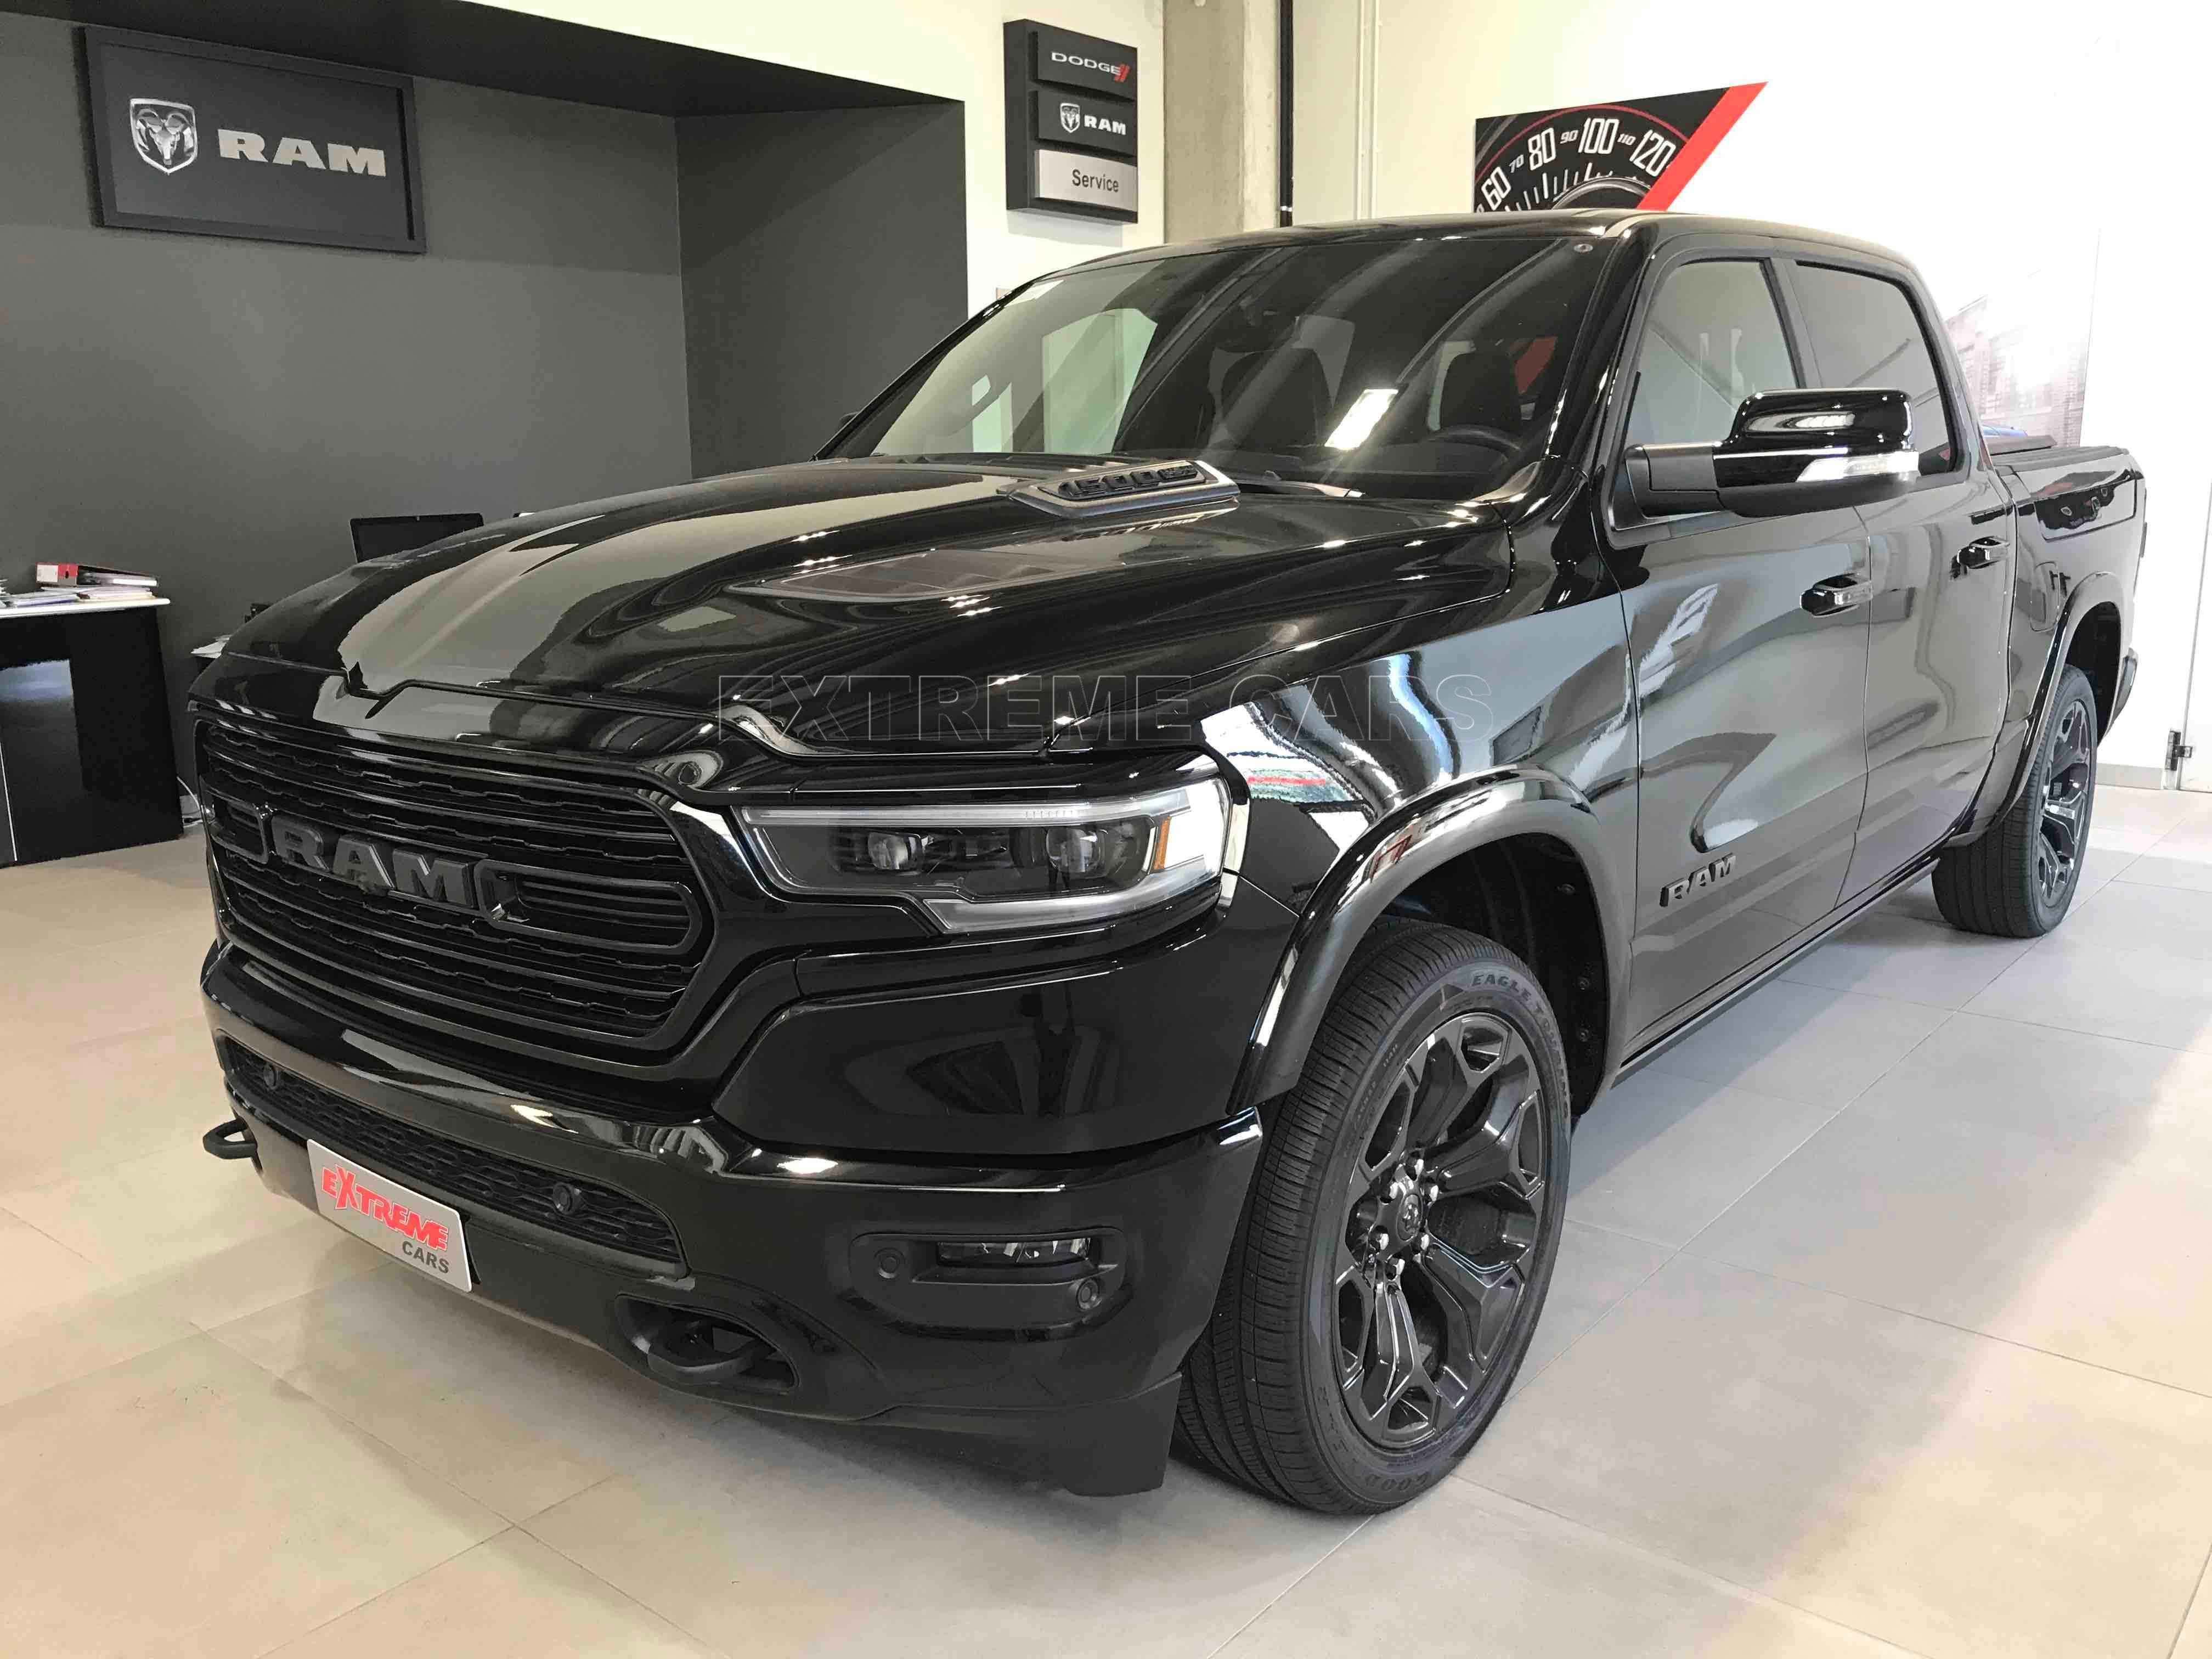 RAM 1500 Off-Road/Pick-up in Black new in Vertemate Con Minoprio - Como - Co for € 86,500.-